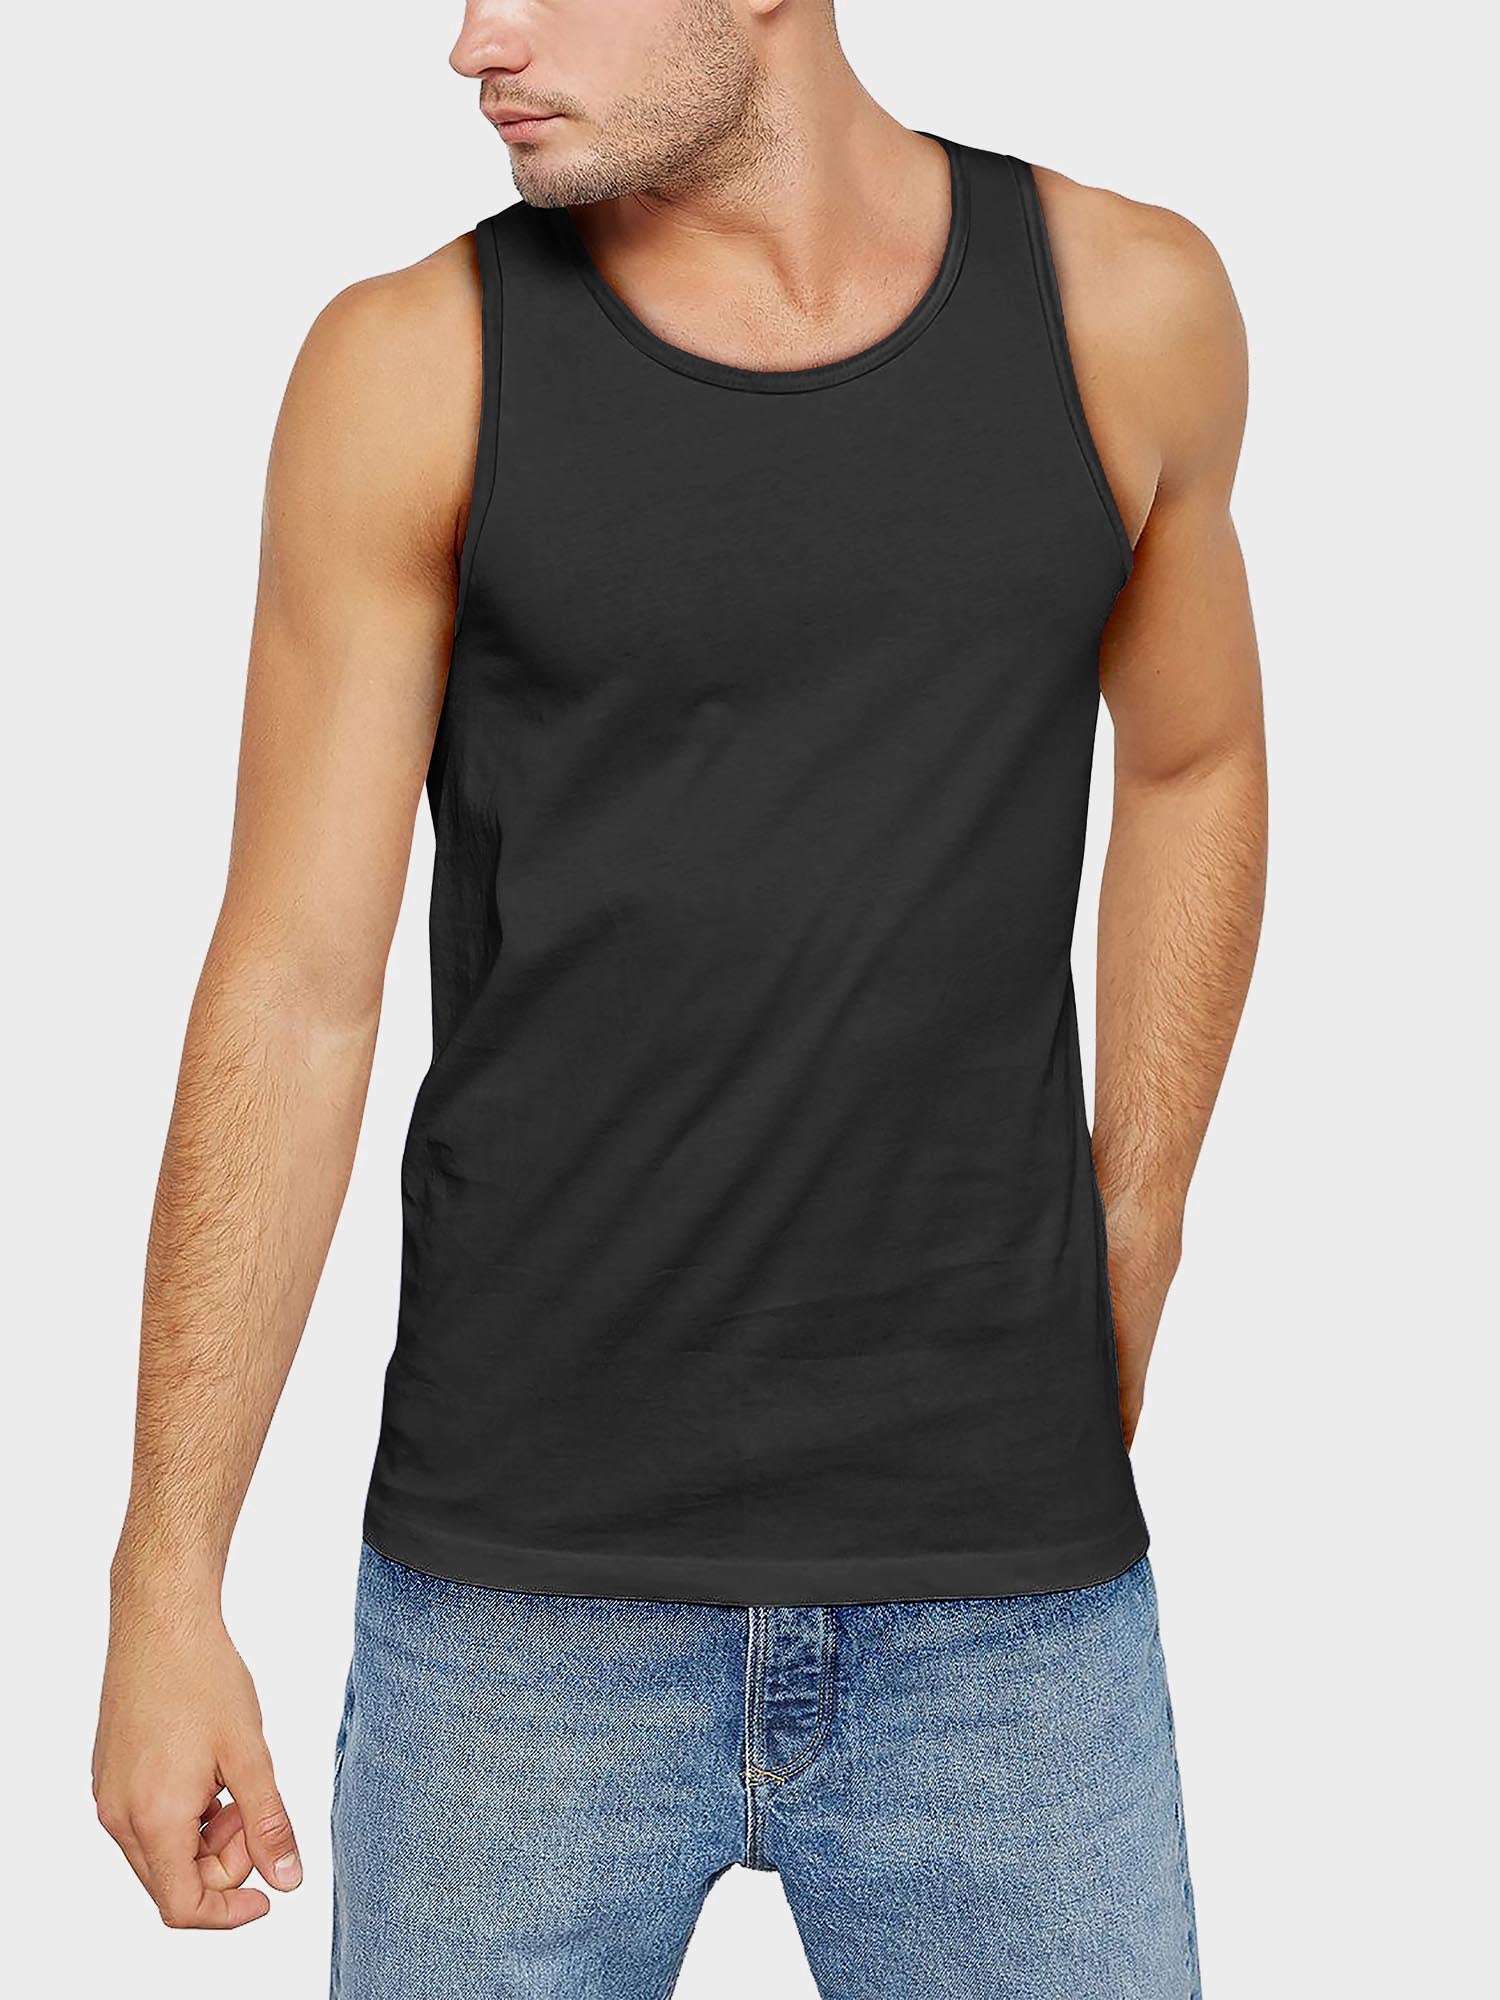 Mens Muscle Fit Workout Sleeveless Tank Top